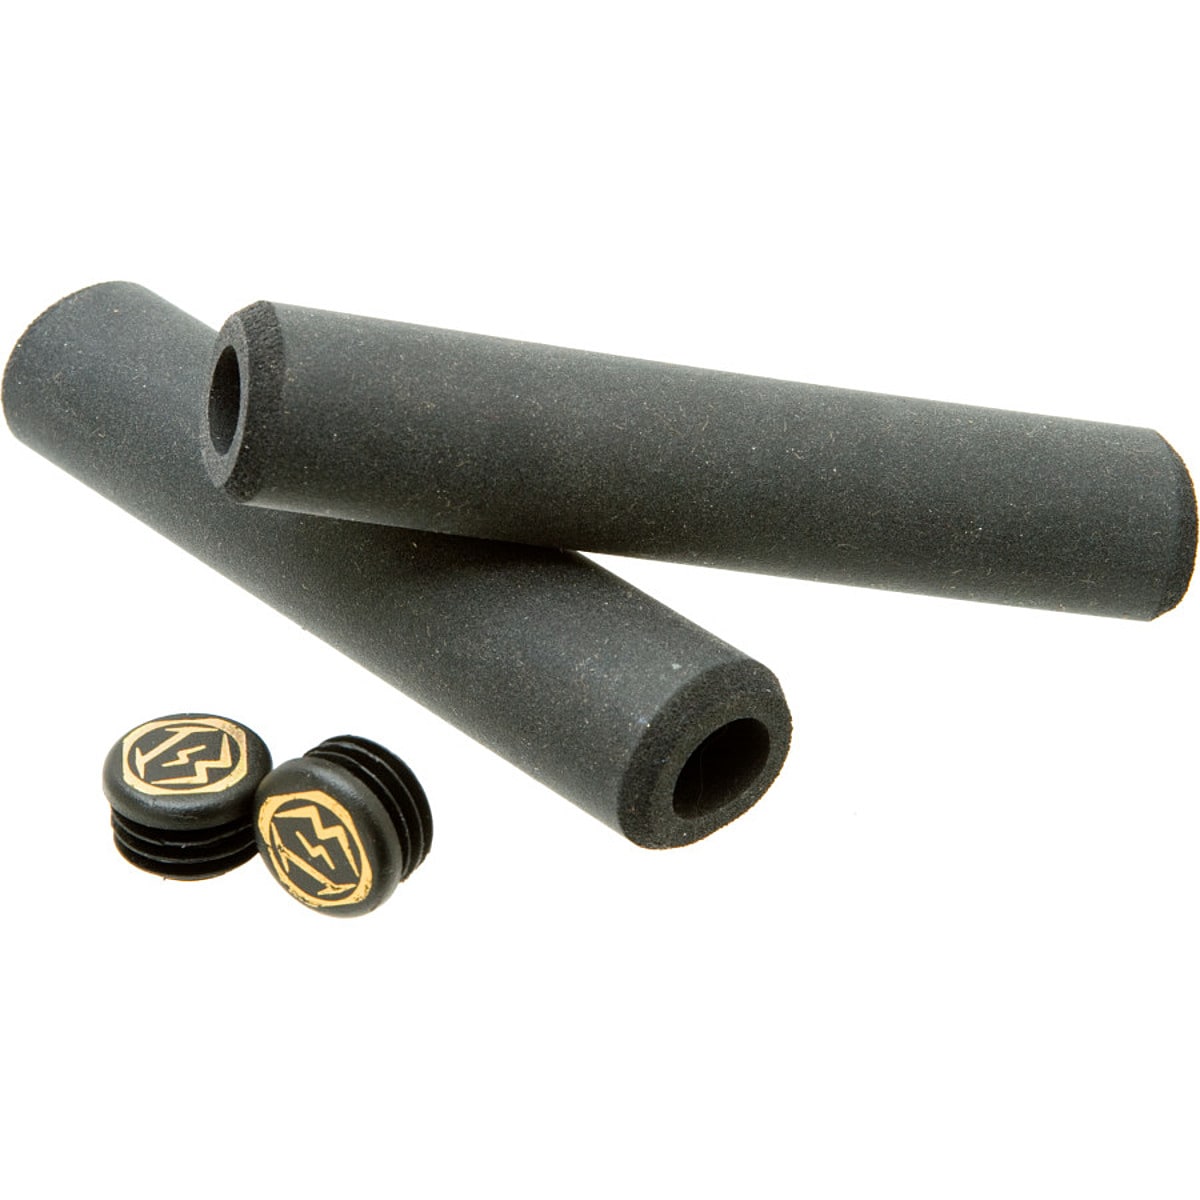 ESI Grips Fit SG Silicone Grips (Black)